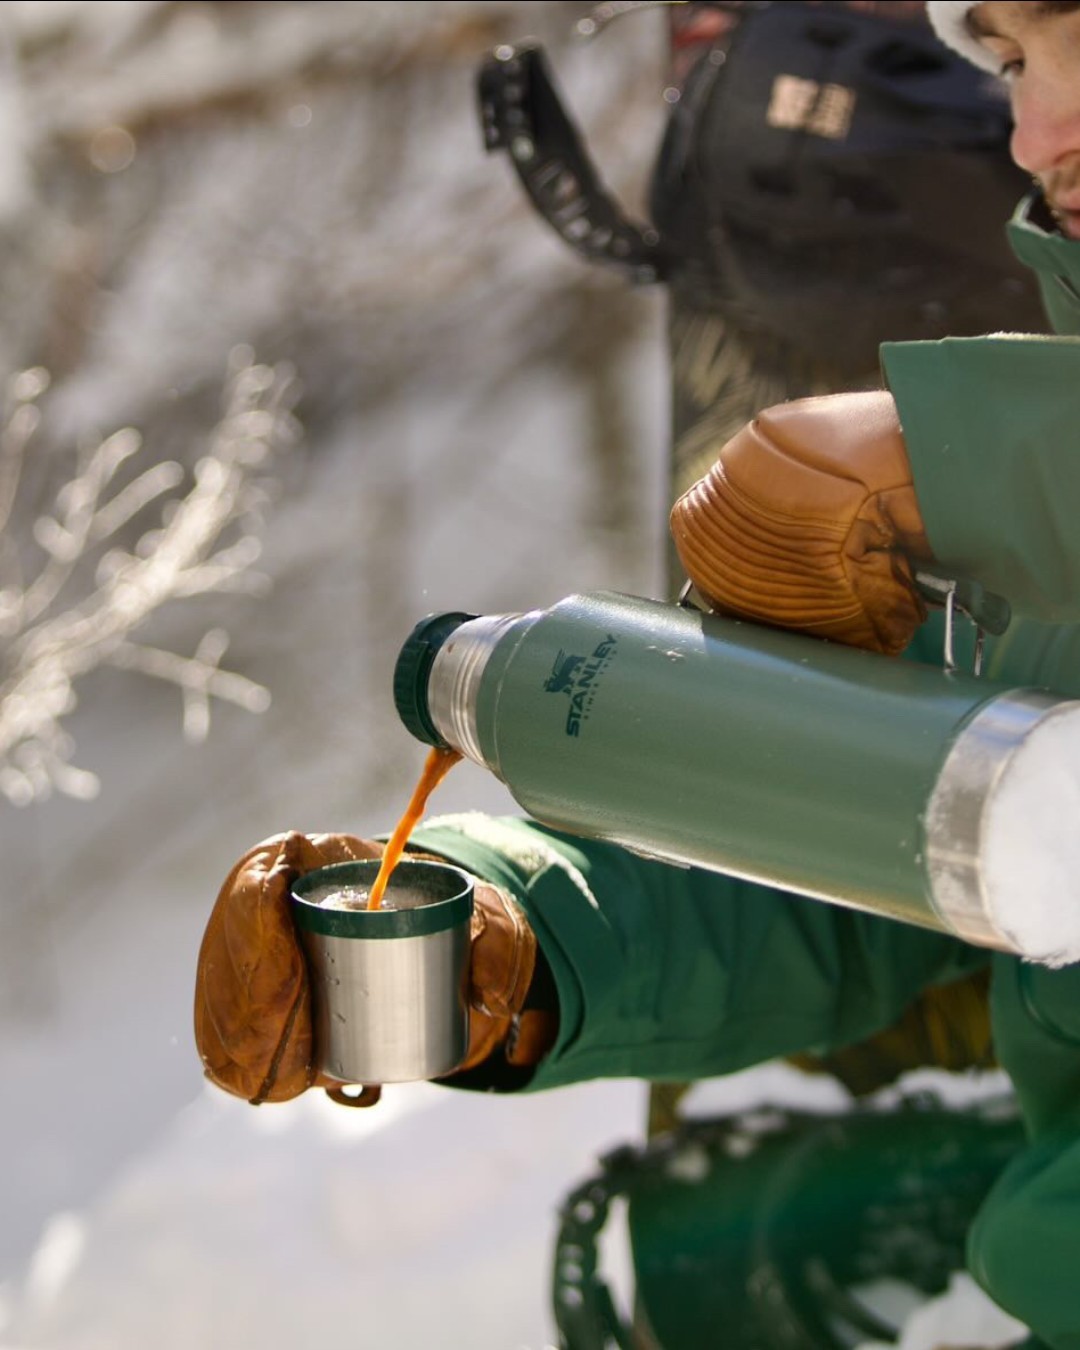 A classic Stanley thermos built to keep things hot or cold for the outdoors